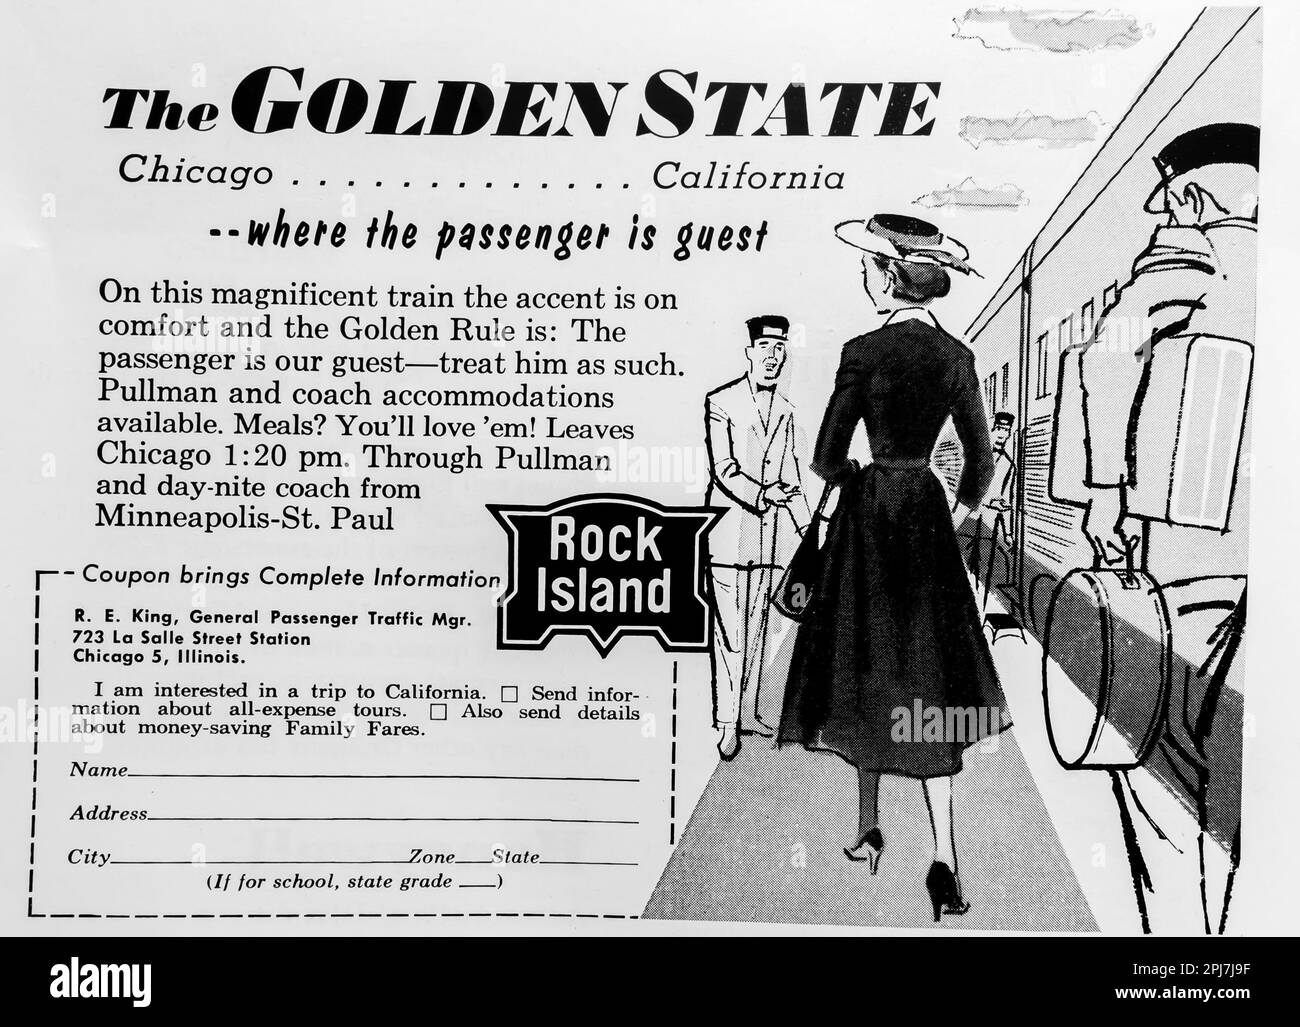 Golden State railway train Chicago to advert in a Natgeo magazine, May 1957 Stock Photo